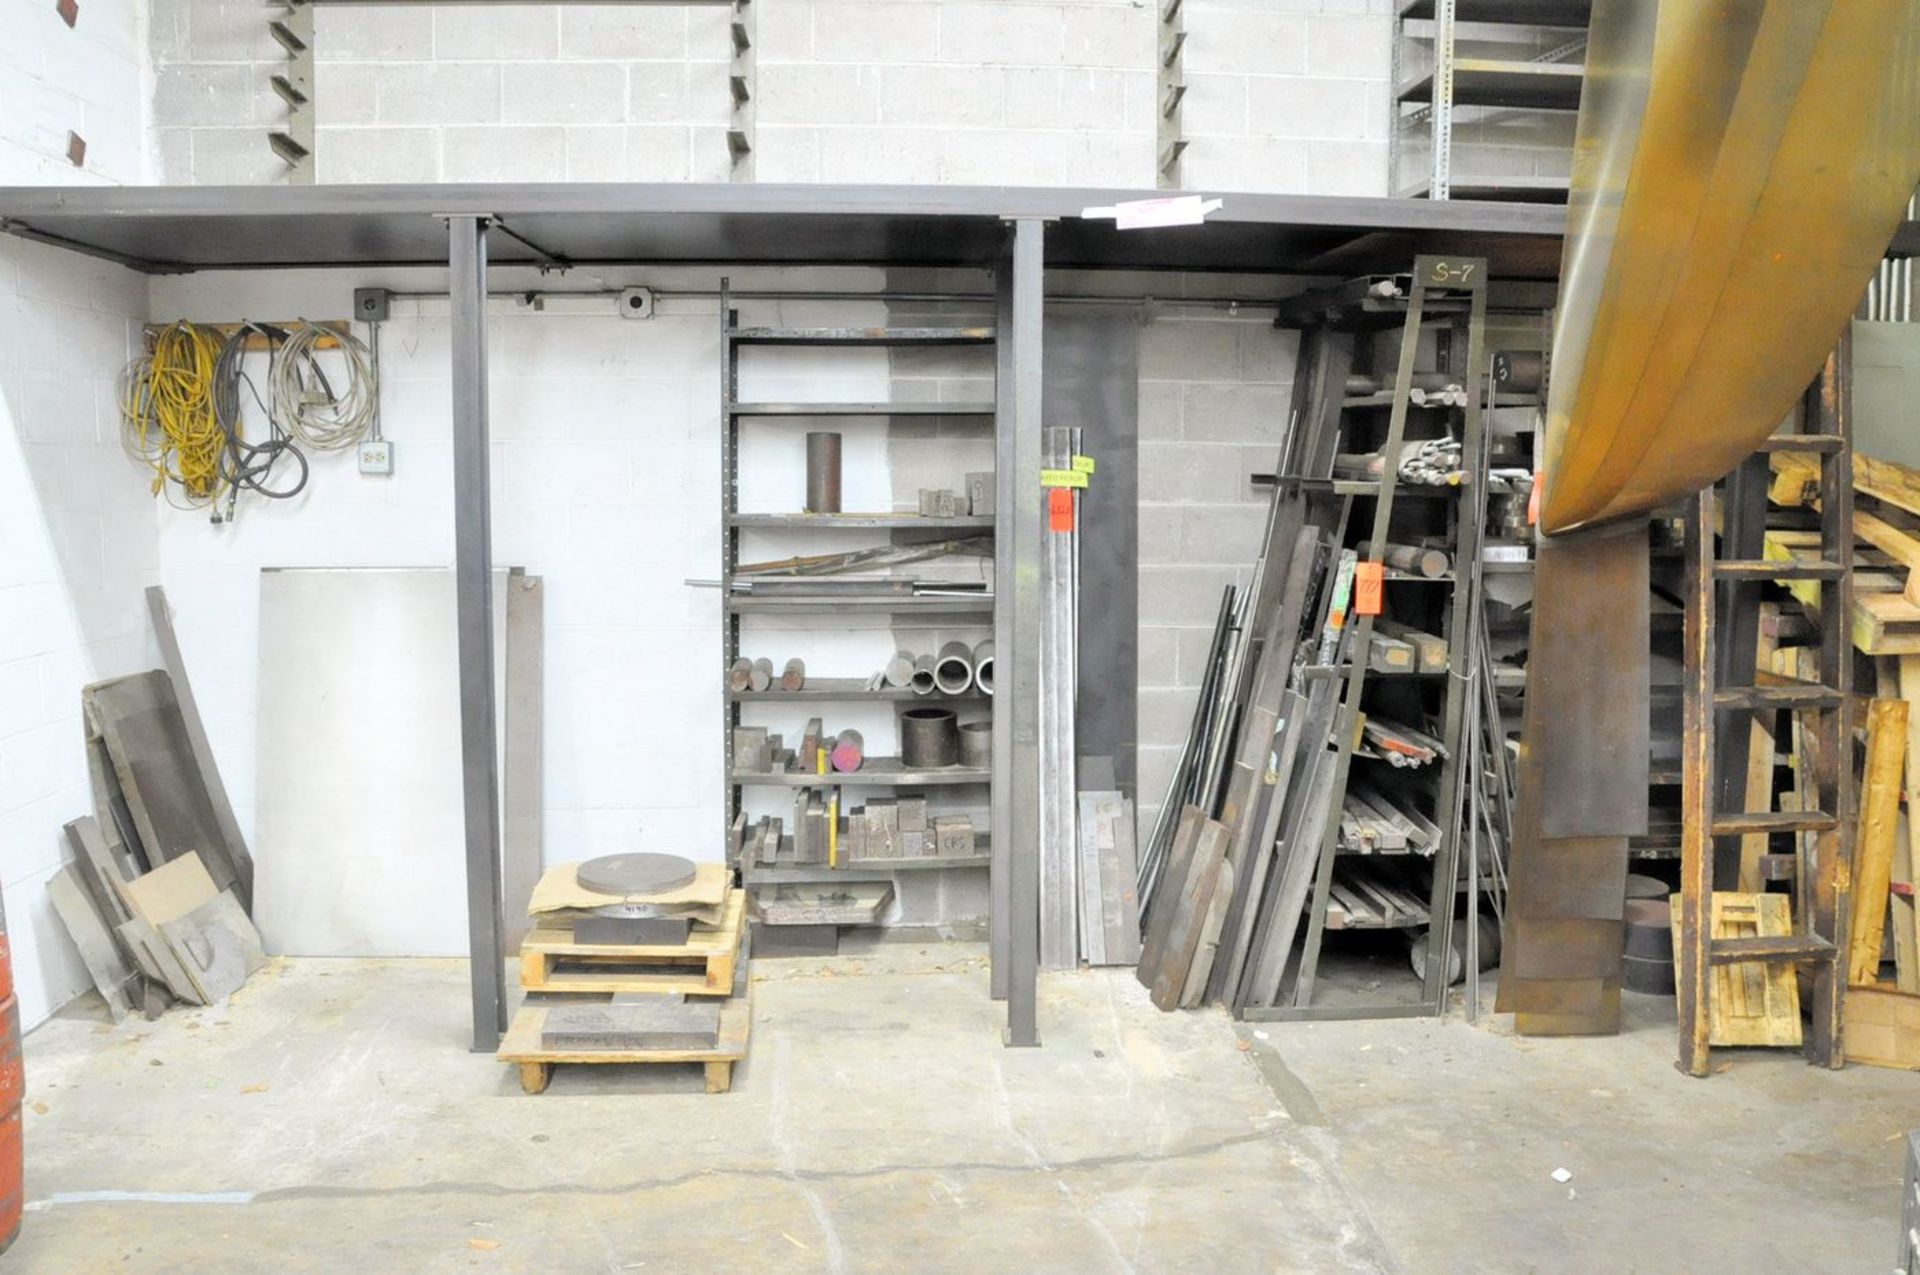 Lot - Steel Stock On and Under Mezzanine with Racks and Shelving Units (Aluminum and Magnesium Stock